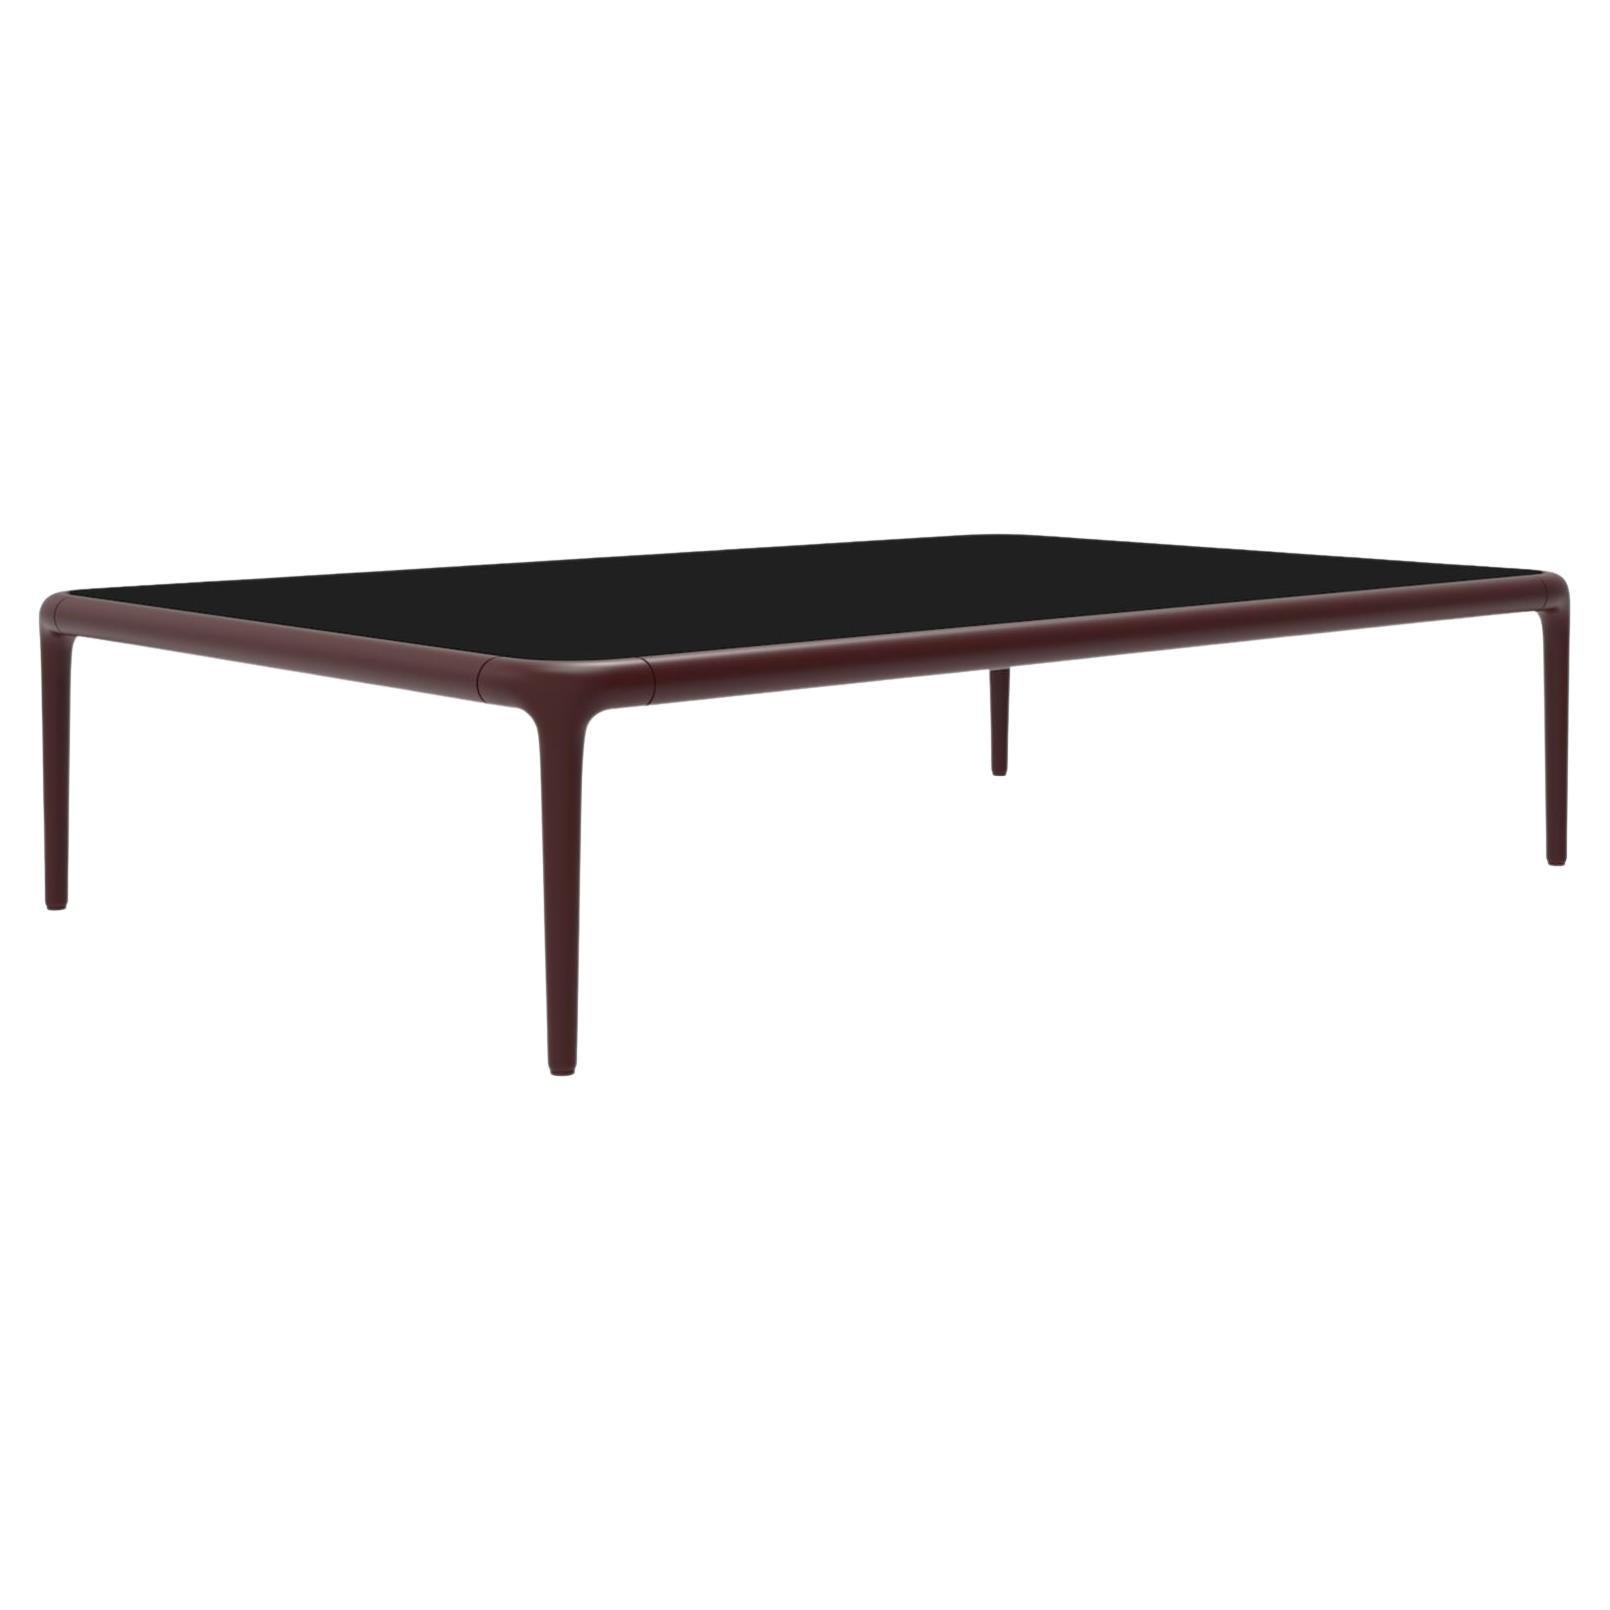 Xaloc Burgundy Coffee Table 120 with Glass Top by Mowee